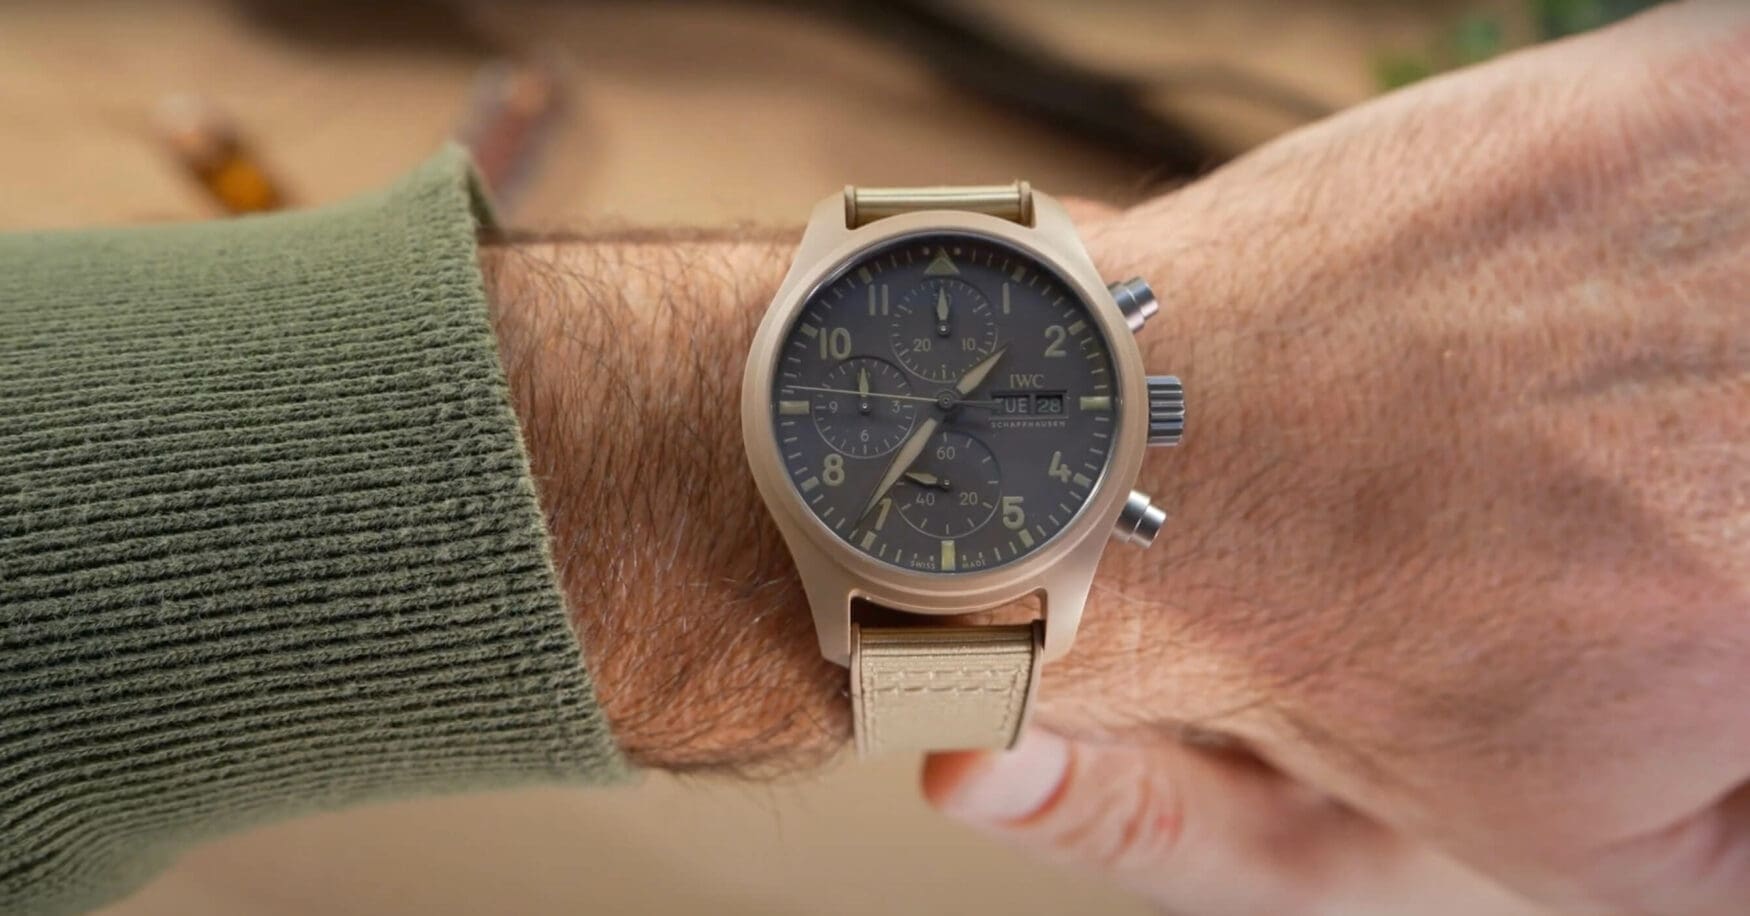 The IWC Pilot’s Watch Chronograph 41 TOP GUN Mojave Desert is the first time this colour has debuted in this size